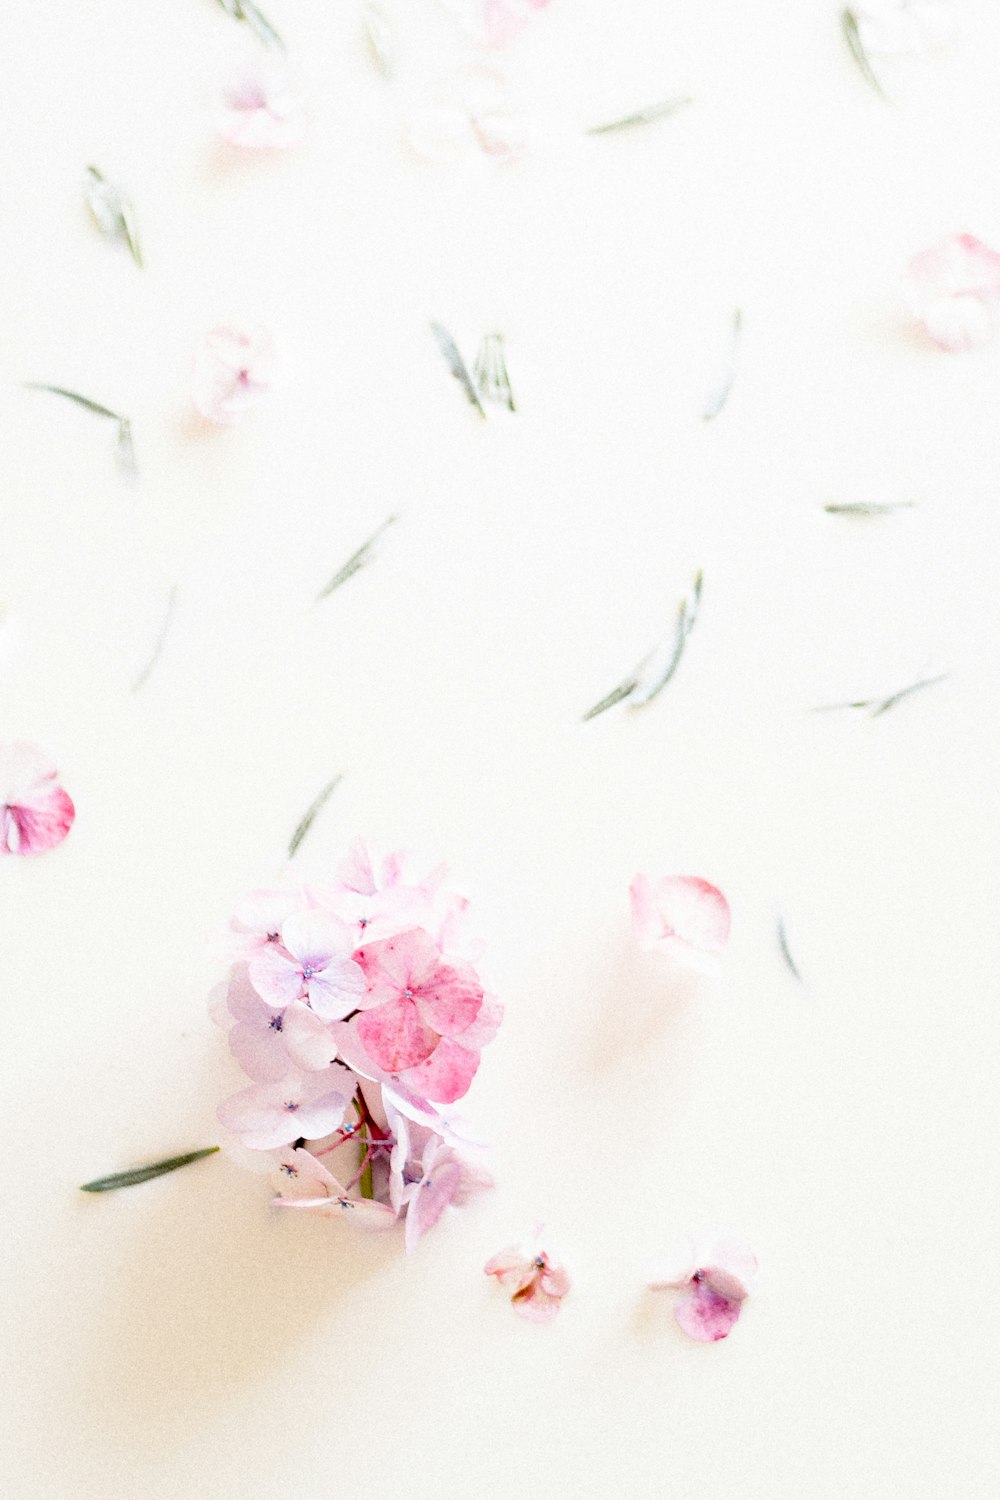 a bunch of pink flowers on a white surface